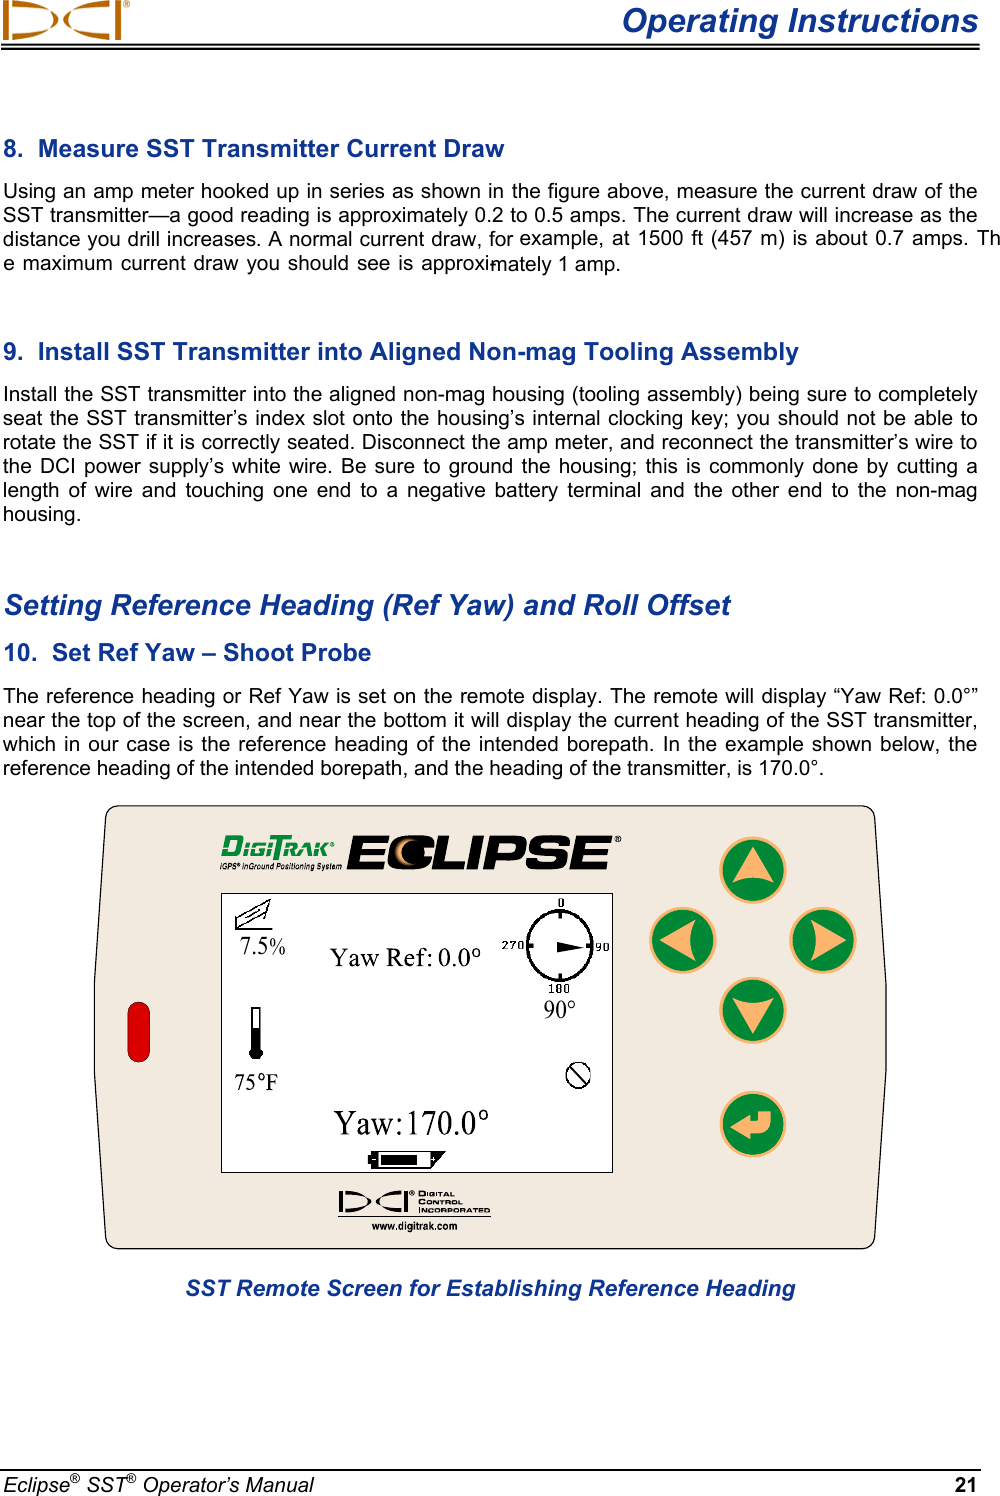 Operating Instructions8.  Measure SST Transmitter Current Draw  Using an amp meter hooked up in series as shown in the figure above, measure the current draw of the SST transmitter—a good reading is approximately 0.2 to 0.5 amps. The current draw will increase as the distance you drill increases . A normal current draw, for example,  at 1500 ft (457 m) is about 0.7 amps. The maximum current draw you should see is approxi-mately 1 amp. 9.  Install SST Transmitter into Aligned Non-mag Tooling Assembly  Install the SST transmitter into the aligned non-mag housing (tooling assembly) being sure to completely seat the SST transmitter’s index slot onto the housing’s internal clocking key; you should not be able to rotate the SST if it is correctly seated. Disconnect the amp meter, and reconnect the transmitter’s wire to the DCI power supply’s white wire.  Be sure to  ground the housing; this is commonly done by  cutting a length  of  wire  and  touching  one  end  to  a  negative  battery  terminal  and  the  other  end  to  the  non-mag housing.   Setting Reference Heading (Ref Yaw) and Roll Offset 10.  Set Ref Yaw – Shoot Probe The reference heading or Ref Yaw is set on the remote display. The remote will display “Yaw Ref: 0.0°” near the top of the screen, and near the bottom it will display the current heading of the SST transmitter, which in  our case  is the reference heading  of the intended  borepath. In  the example shown below, the reference heading of the intended borepath, and the heading of the transmitter, is 170.0°.   90°7.5%SST Remote Screen for Establishing Reference Heading Eclipse® SST® Operator’s Manual  21